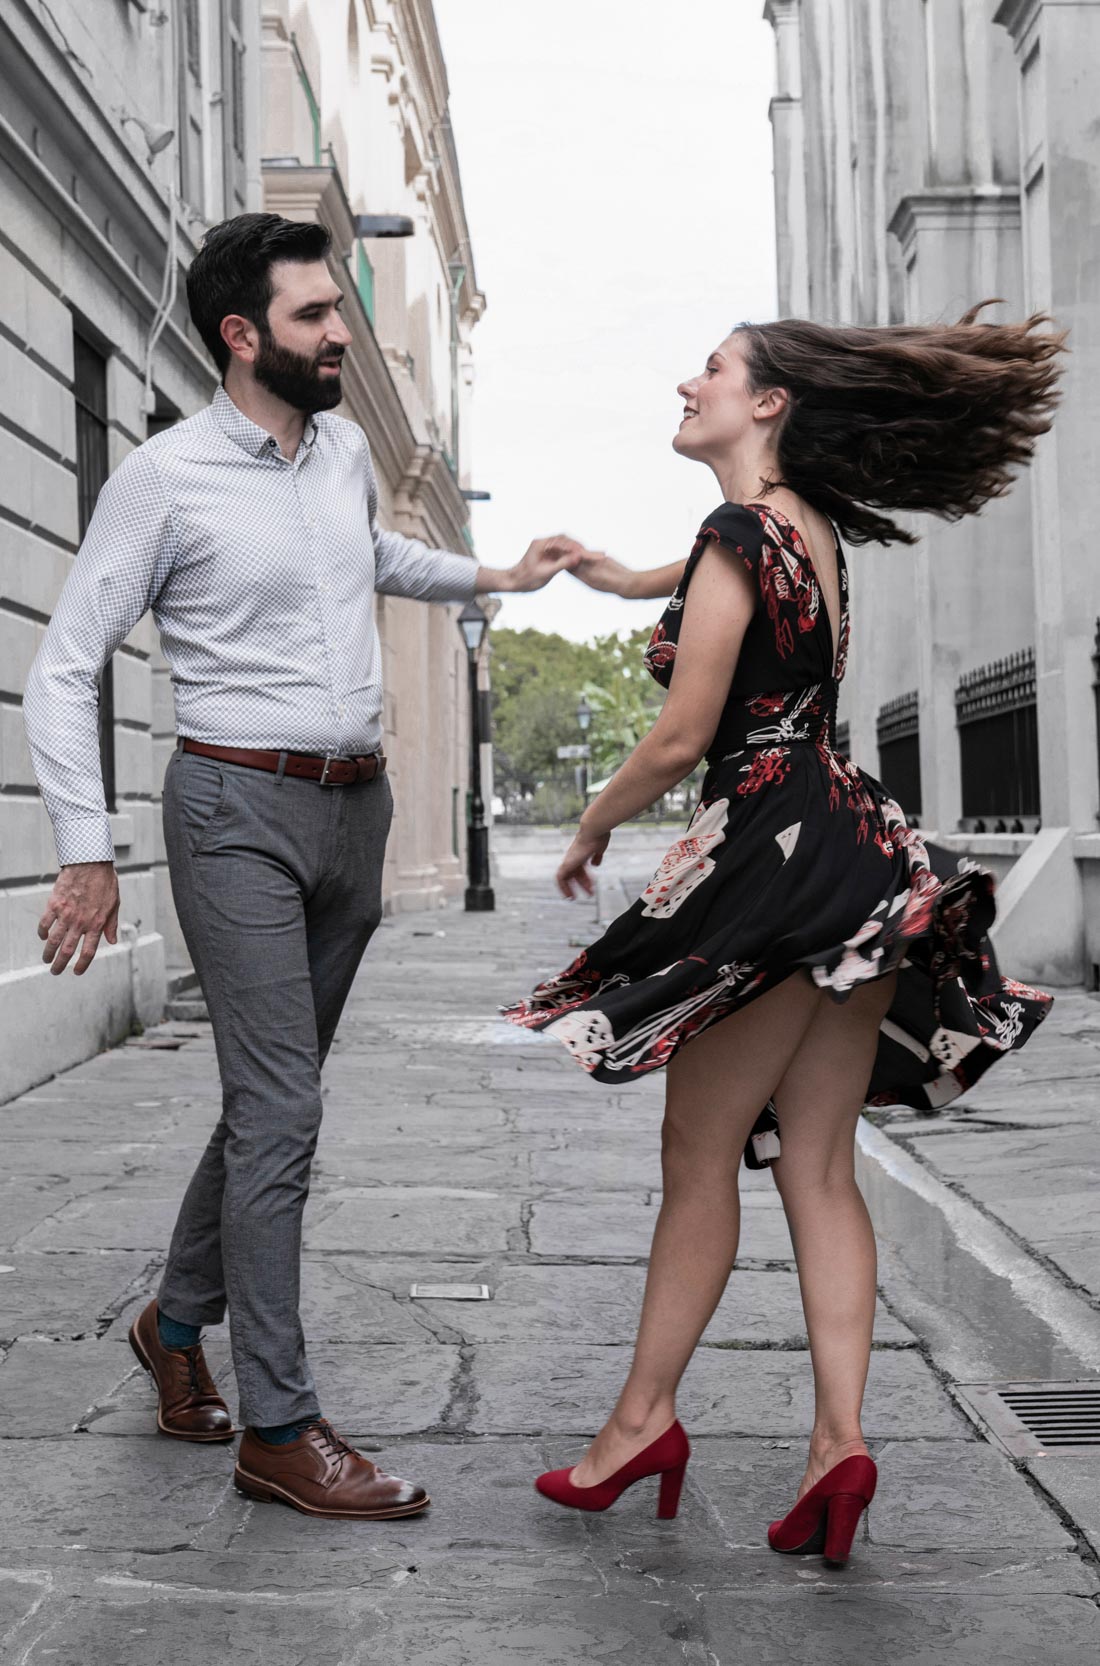 Romantic couple dancing together in an alleyway in front of a New Orleans French Quarter cathedral